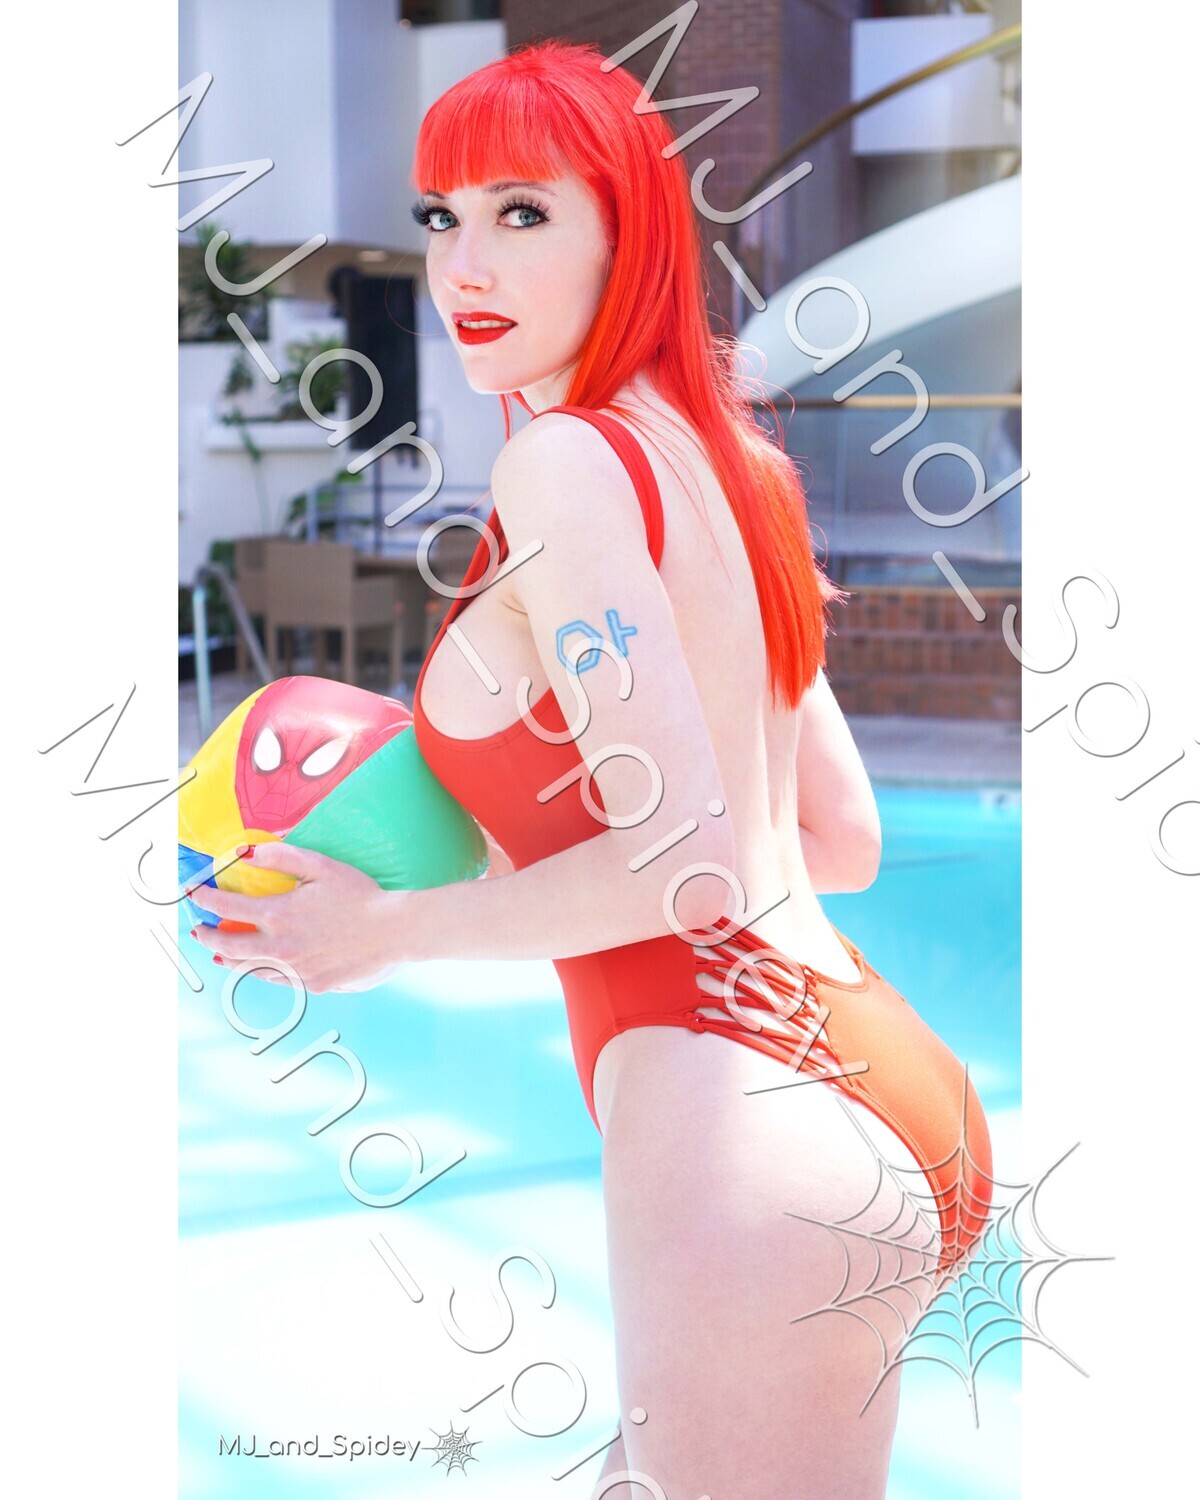 Marvel - Spider-Man - Mary Jane Watson - Swimsuit 10 -  Cosplay Print (@MJ_and_Spidey, MJ and Spidey, Comics)